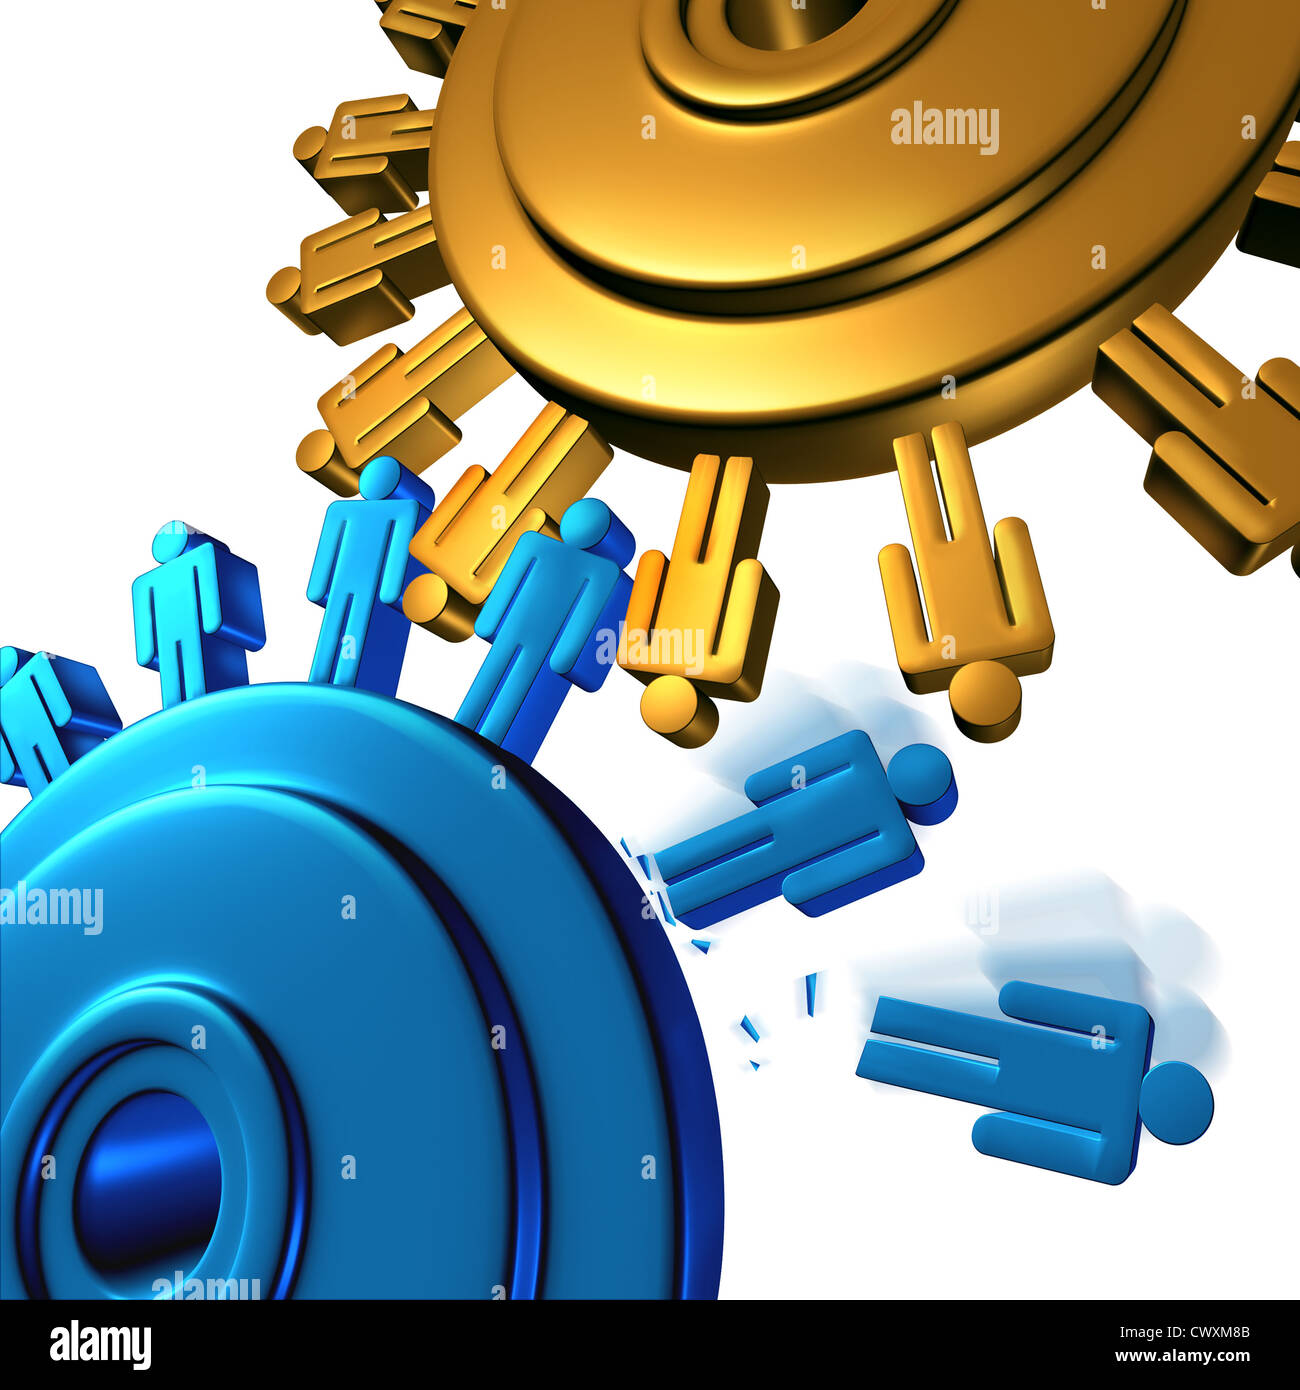 Downsizing and unemployment with job cuts and losses for better business efficiency with teamwork firings to reduce the work force finincial budget of a company with two gears or cogs in the shape of people icons on white. Stock Photo